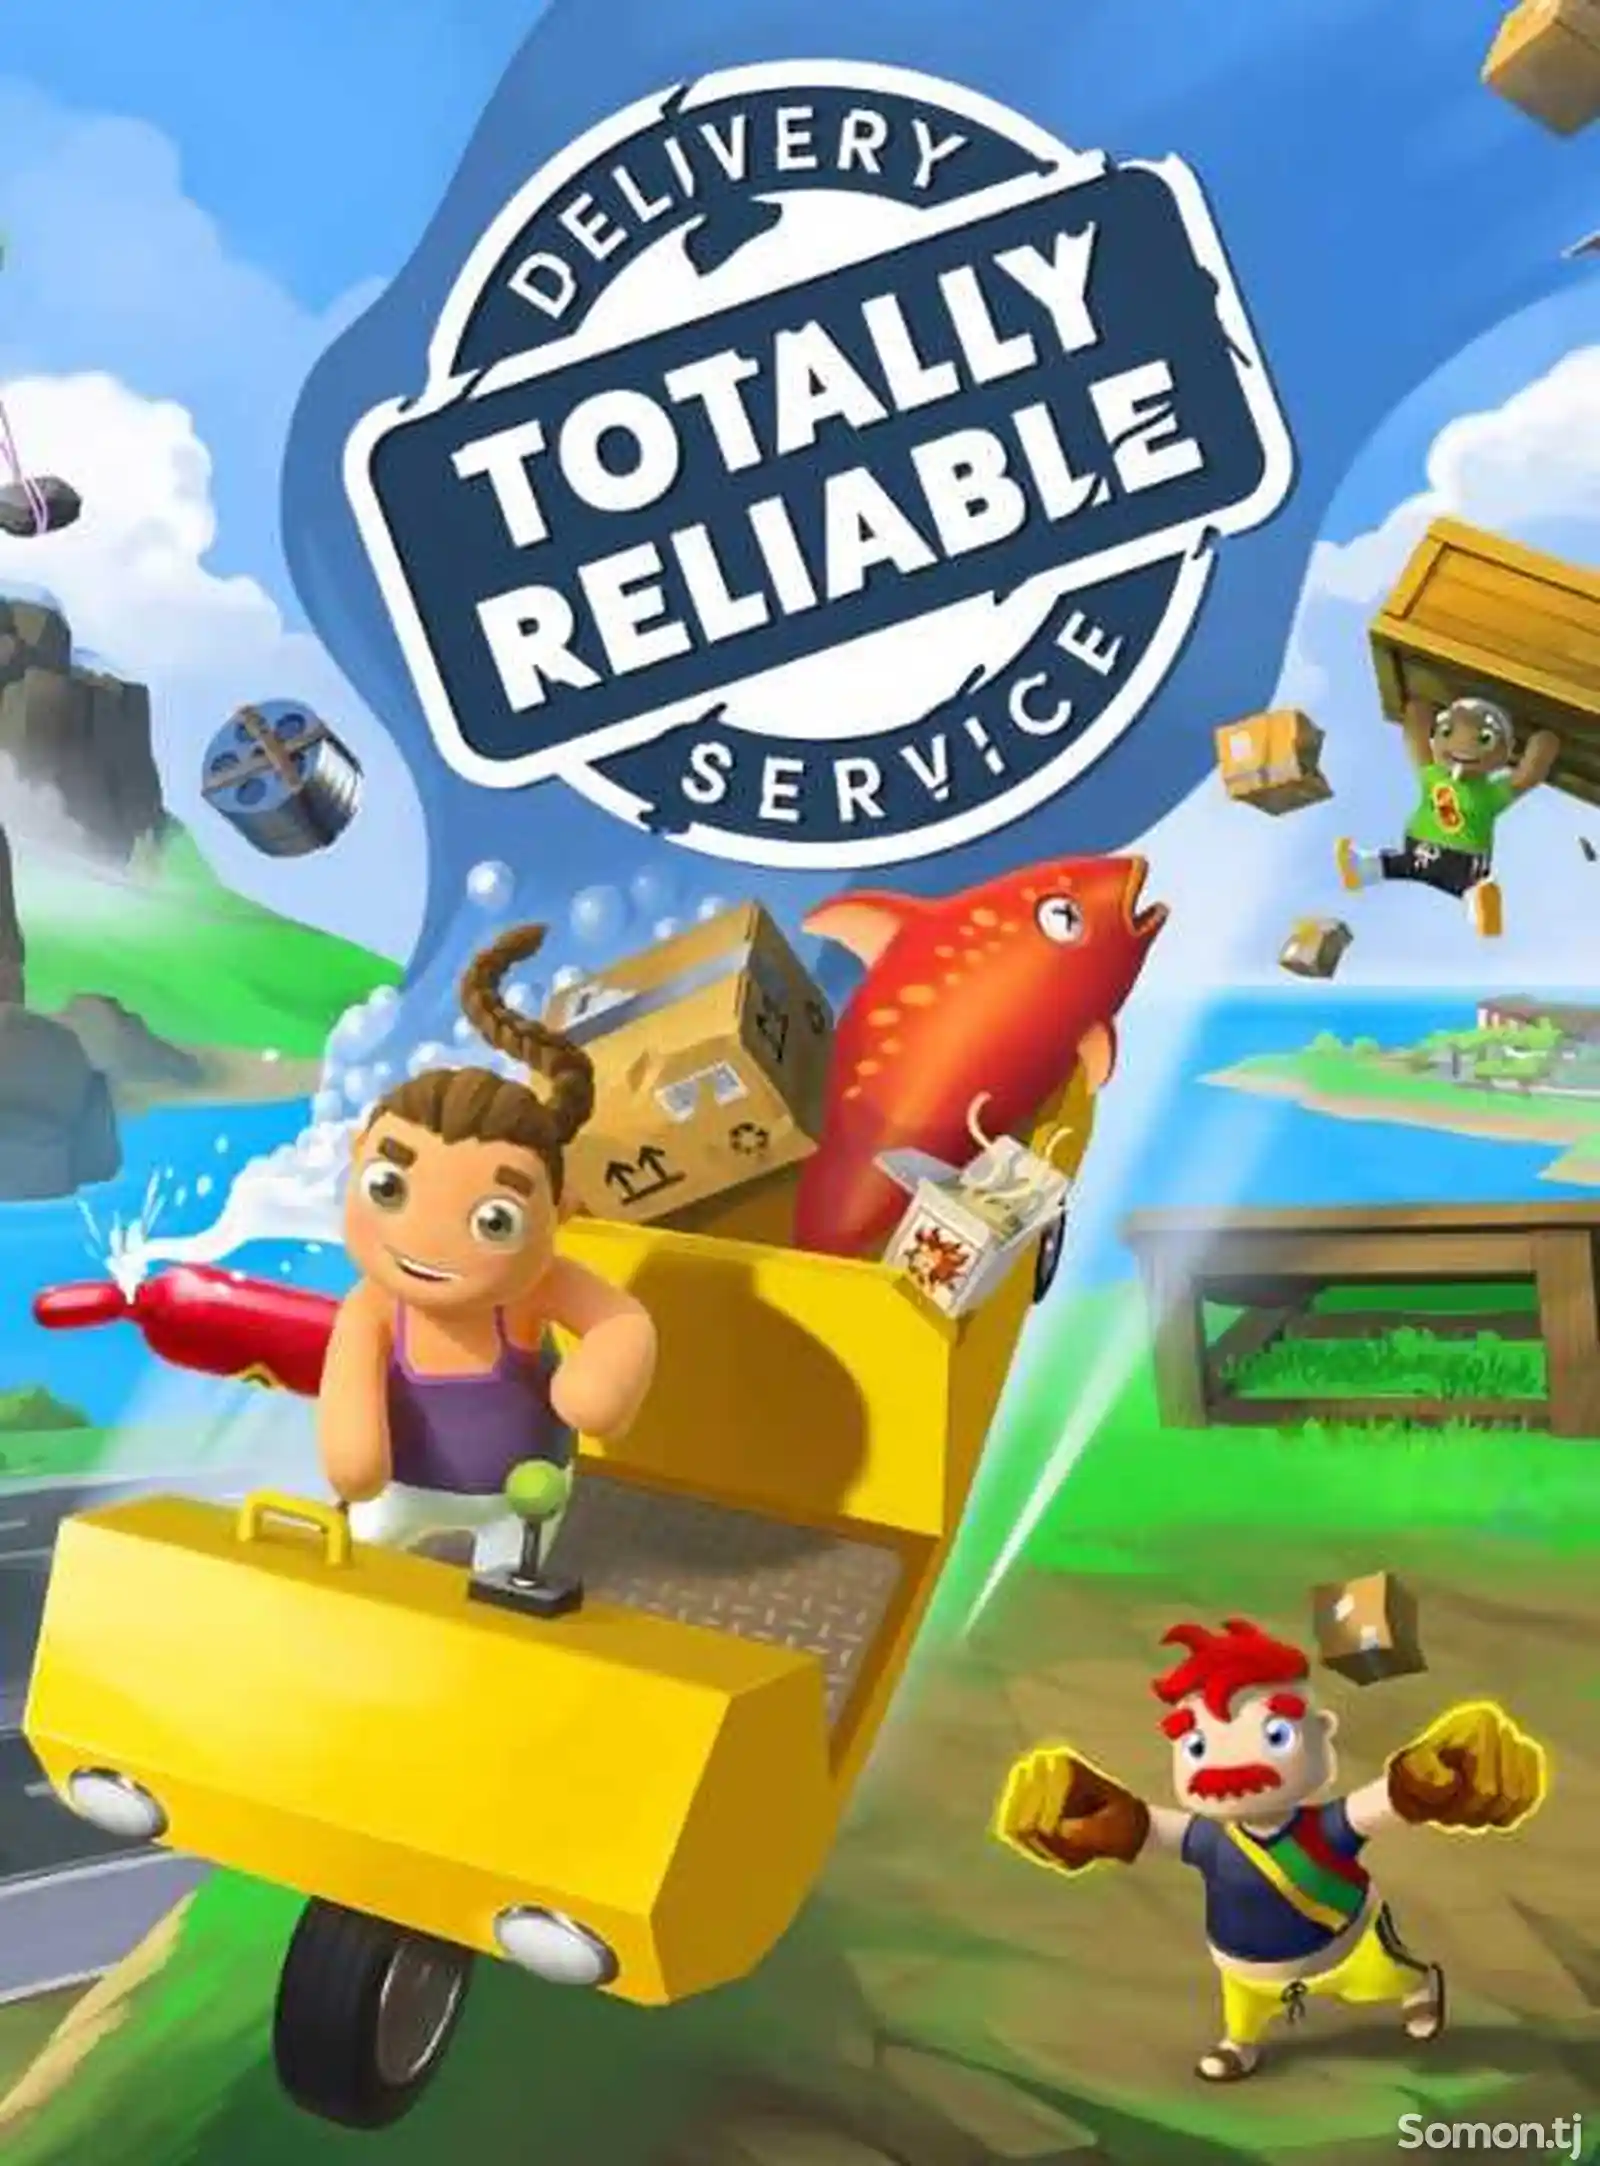 Игра Totally reliable delivery service для PS-4 / 6.72 / 7.02 / 7.55 / 9.00 /-1